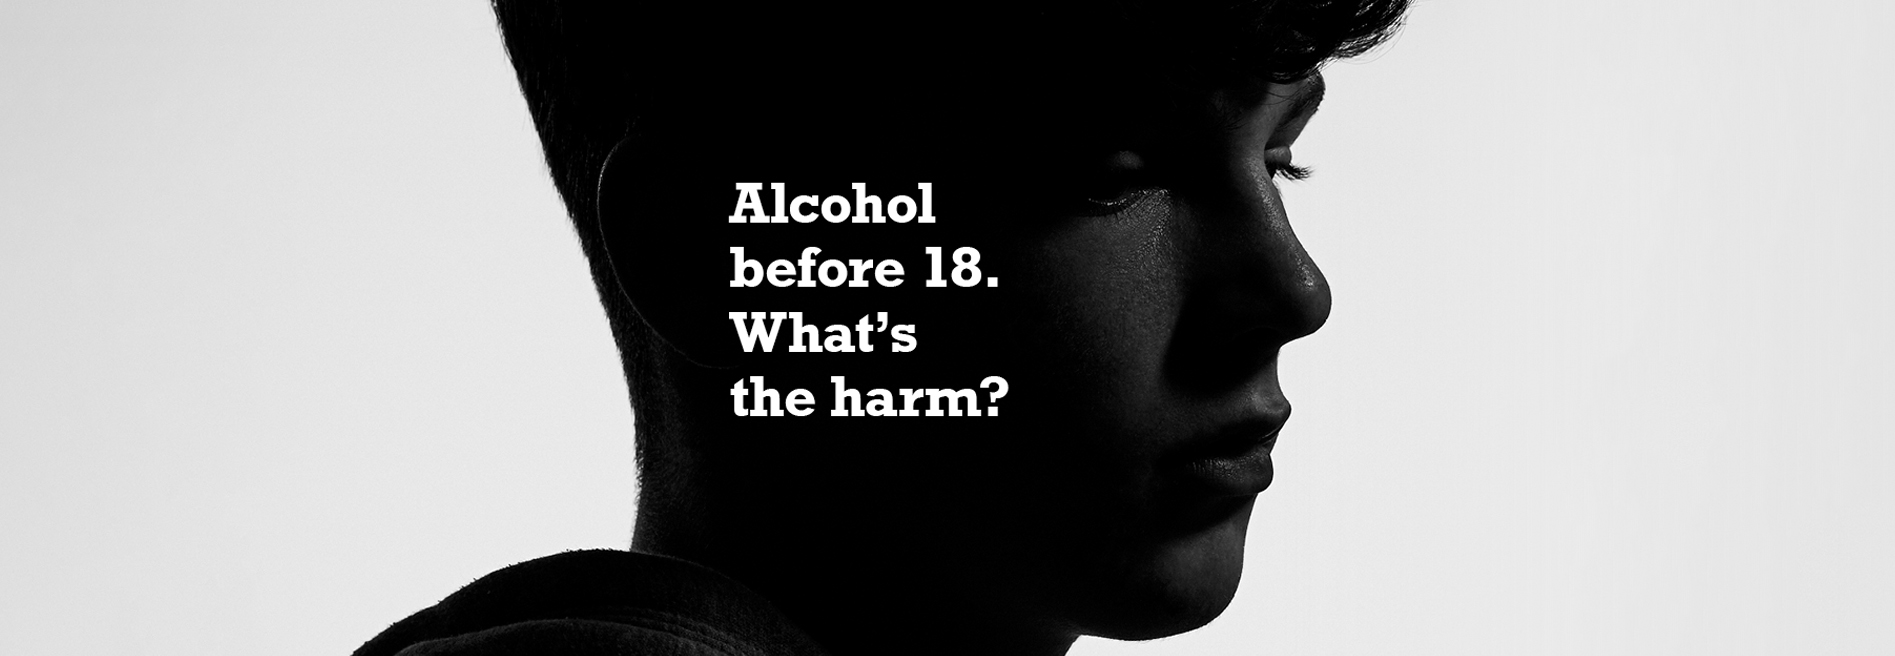 North East parents urged to think twice about providing alcohol to children